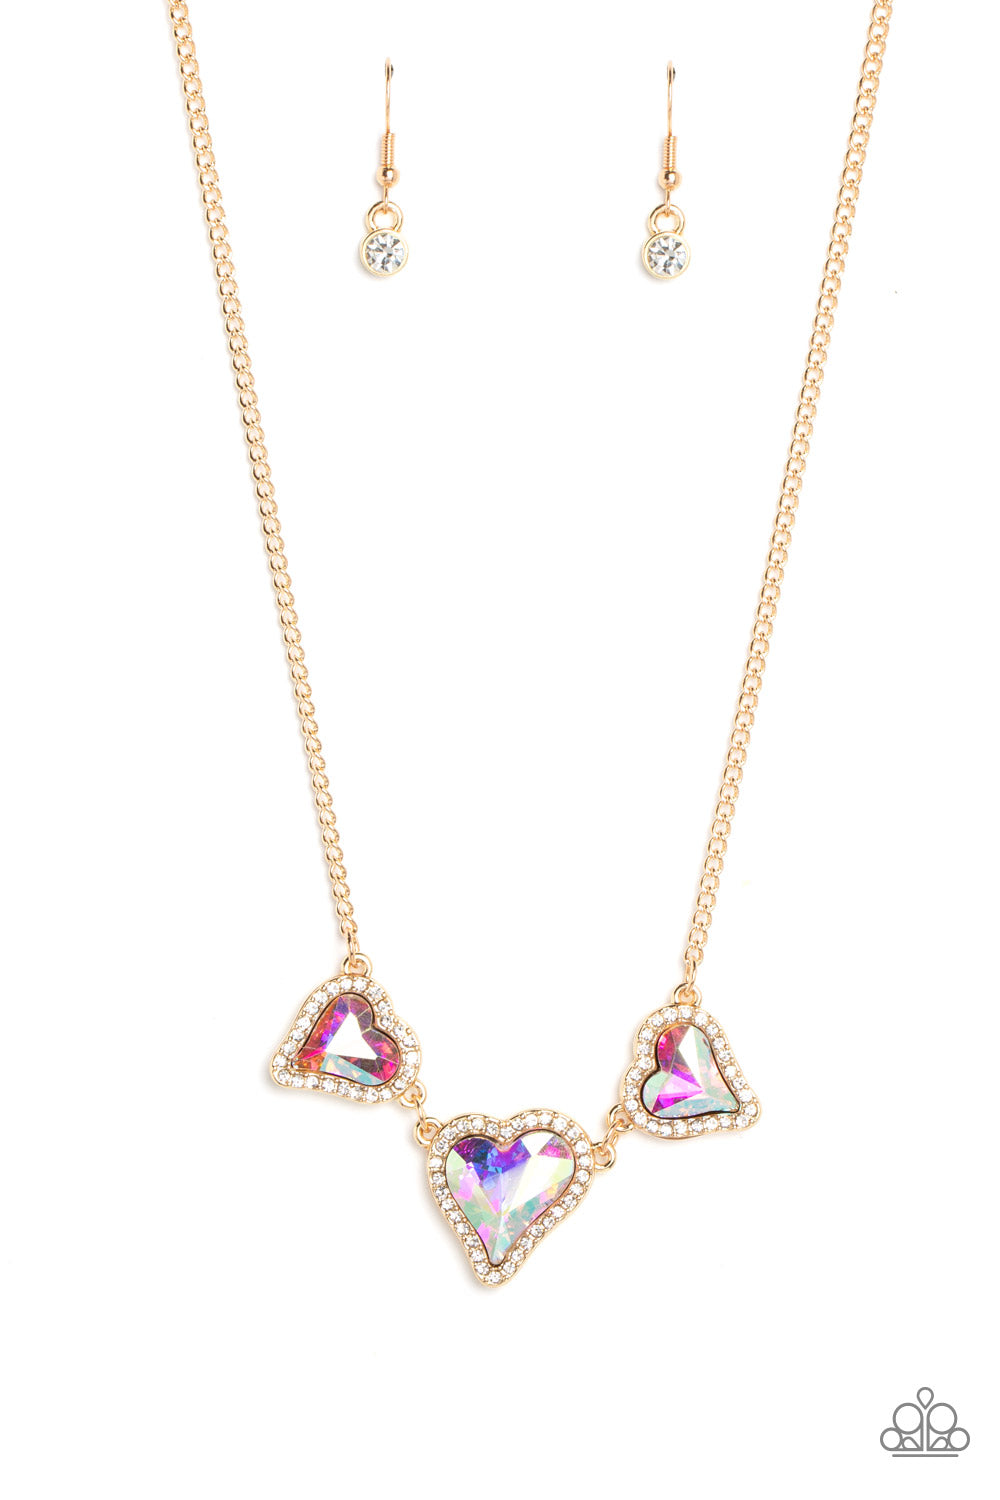 State of the HEART Gold Necklace - Paparazzi Accessories  Nestled in white rhinestone frames, a trio of glittery iridescent heart-shaped gems delicately links and dangles down the neckline for a dash of swoon-worthy shimmer on a gold chain. Features an adjustable clasp closure. Due to its prismatic palette, color may vary.  Sold as one individual necklace. Includes one pair of matching earrings.  P2RE-GDXX-456XX